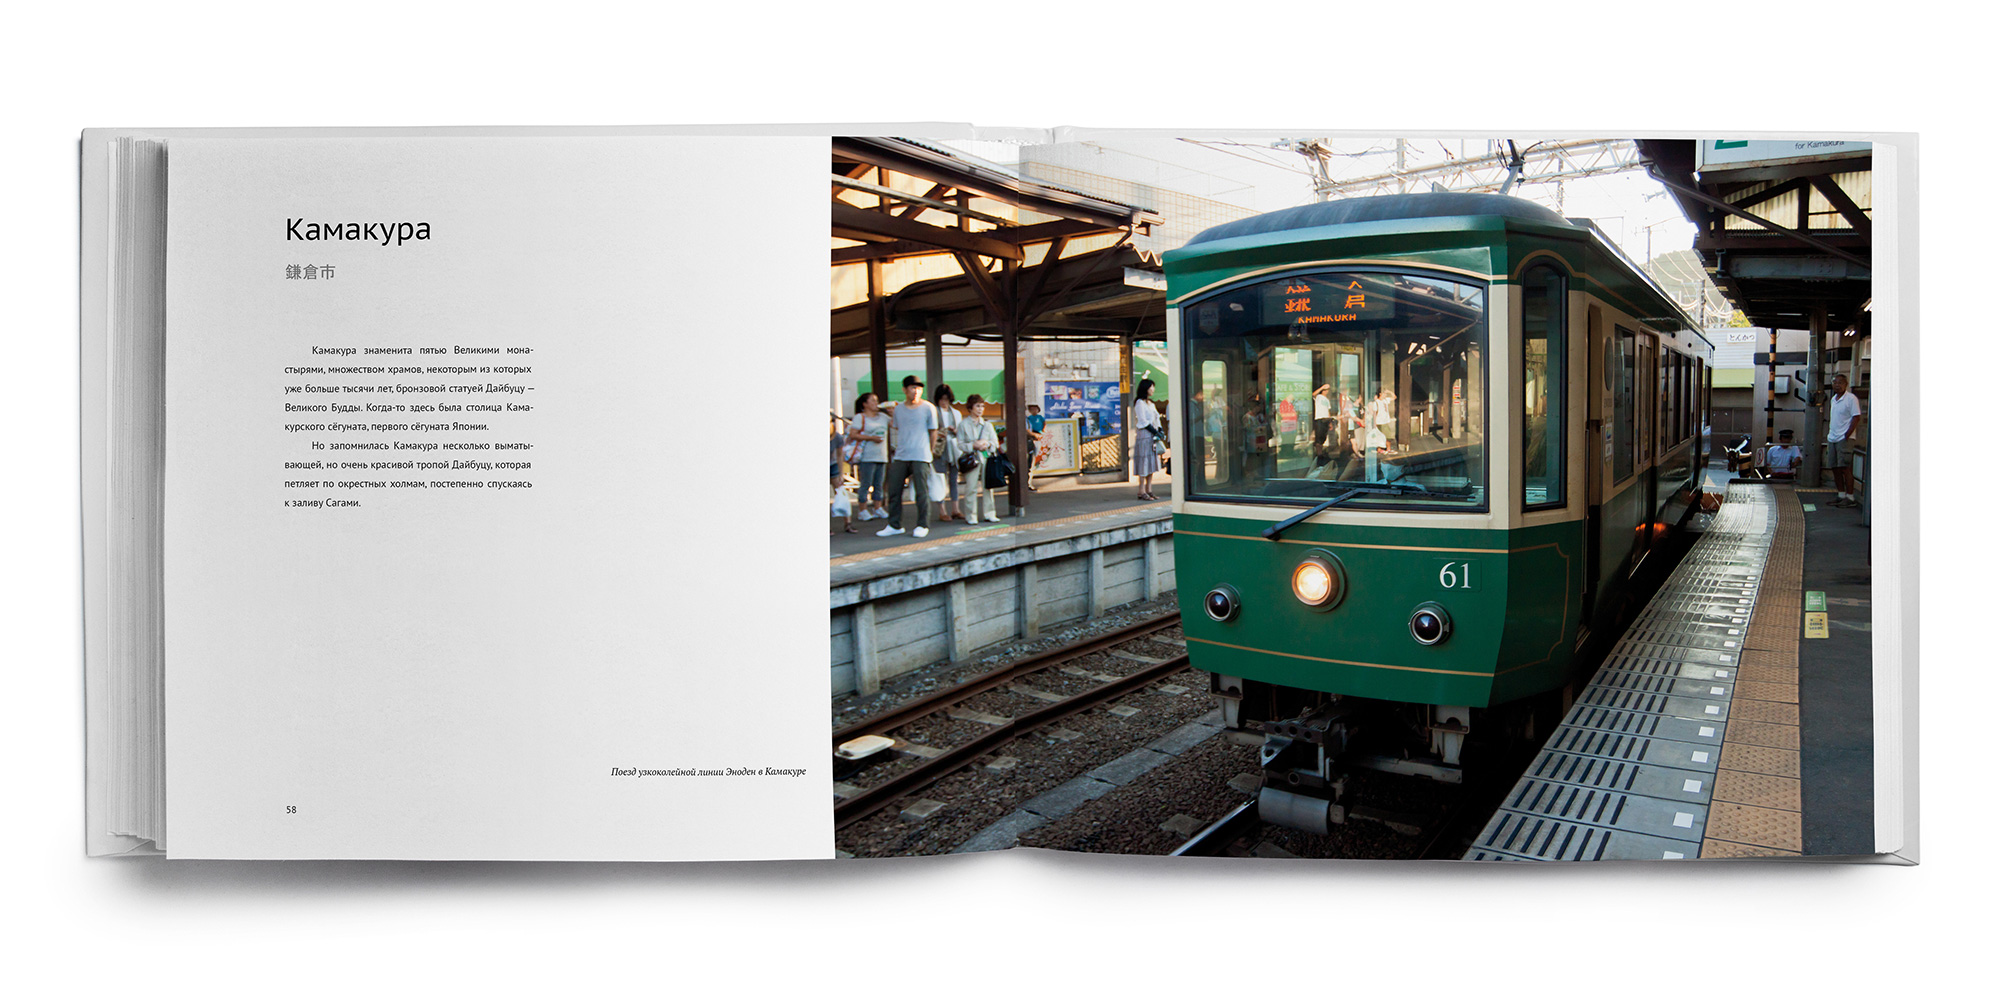 The Monocle Travel Guide to Kyoto : The Monocle Travel Guide Series